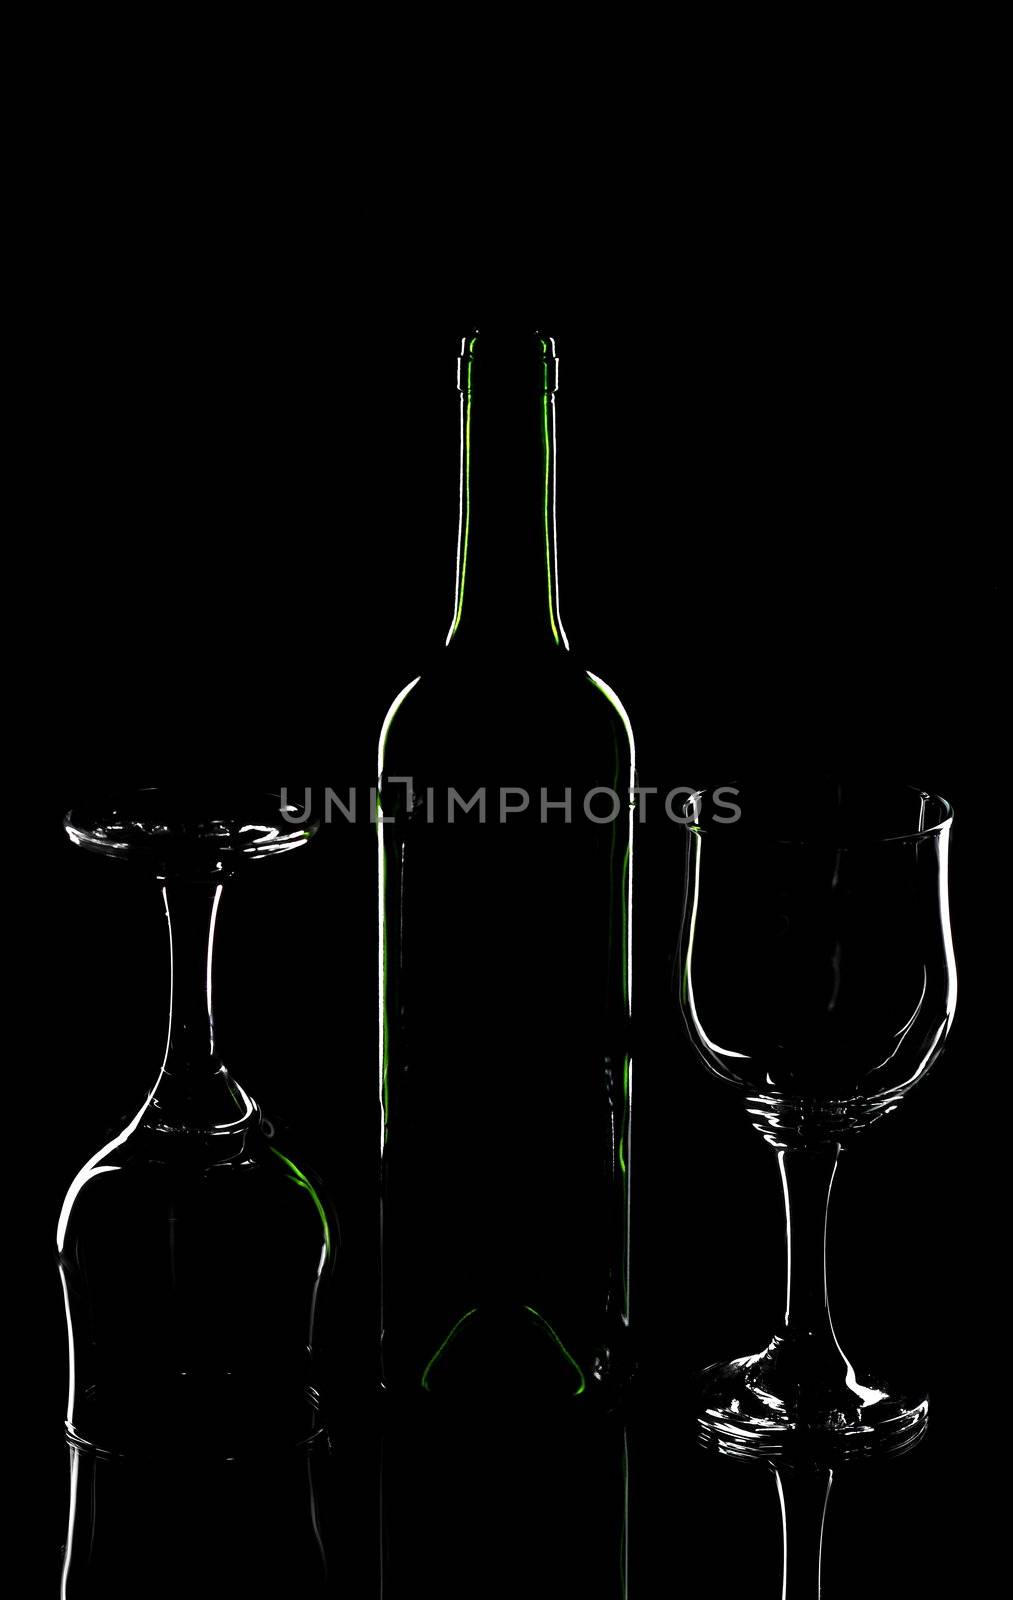 Wine bottle and wine glasses on a black background